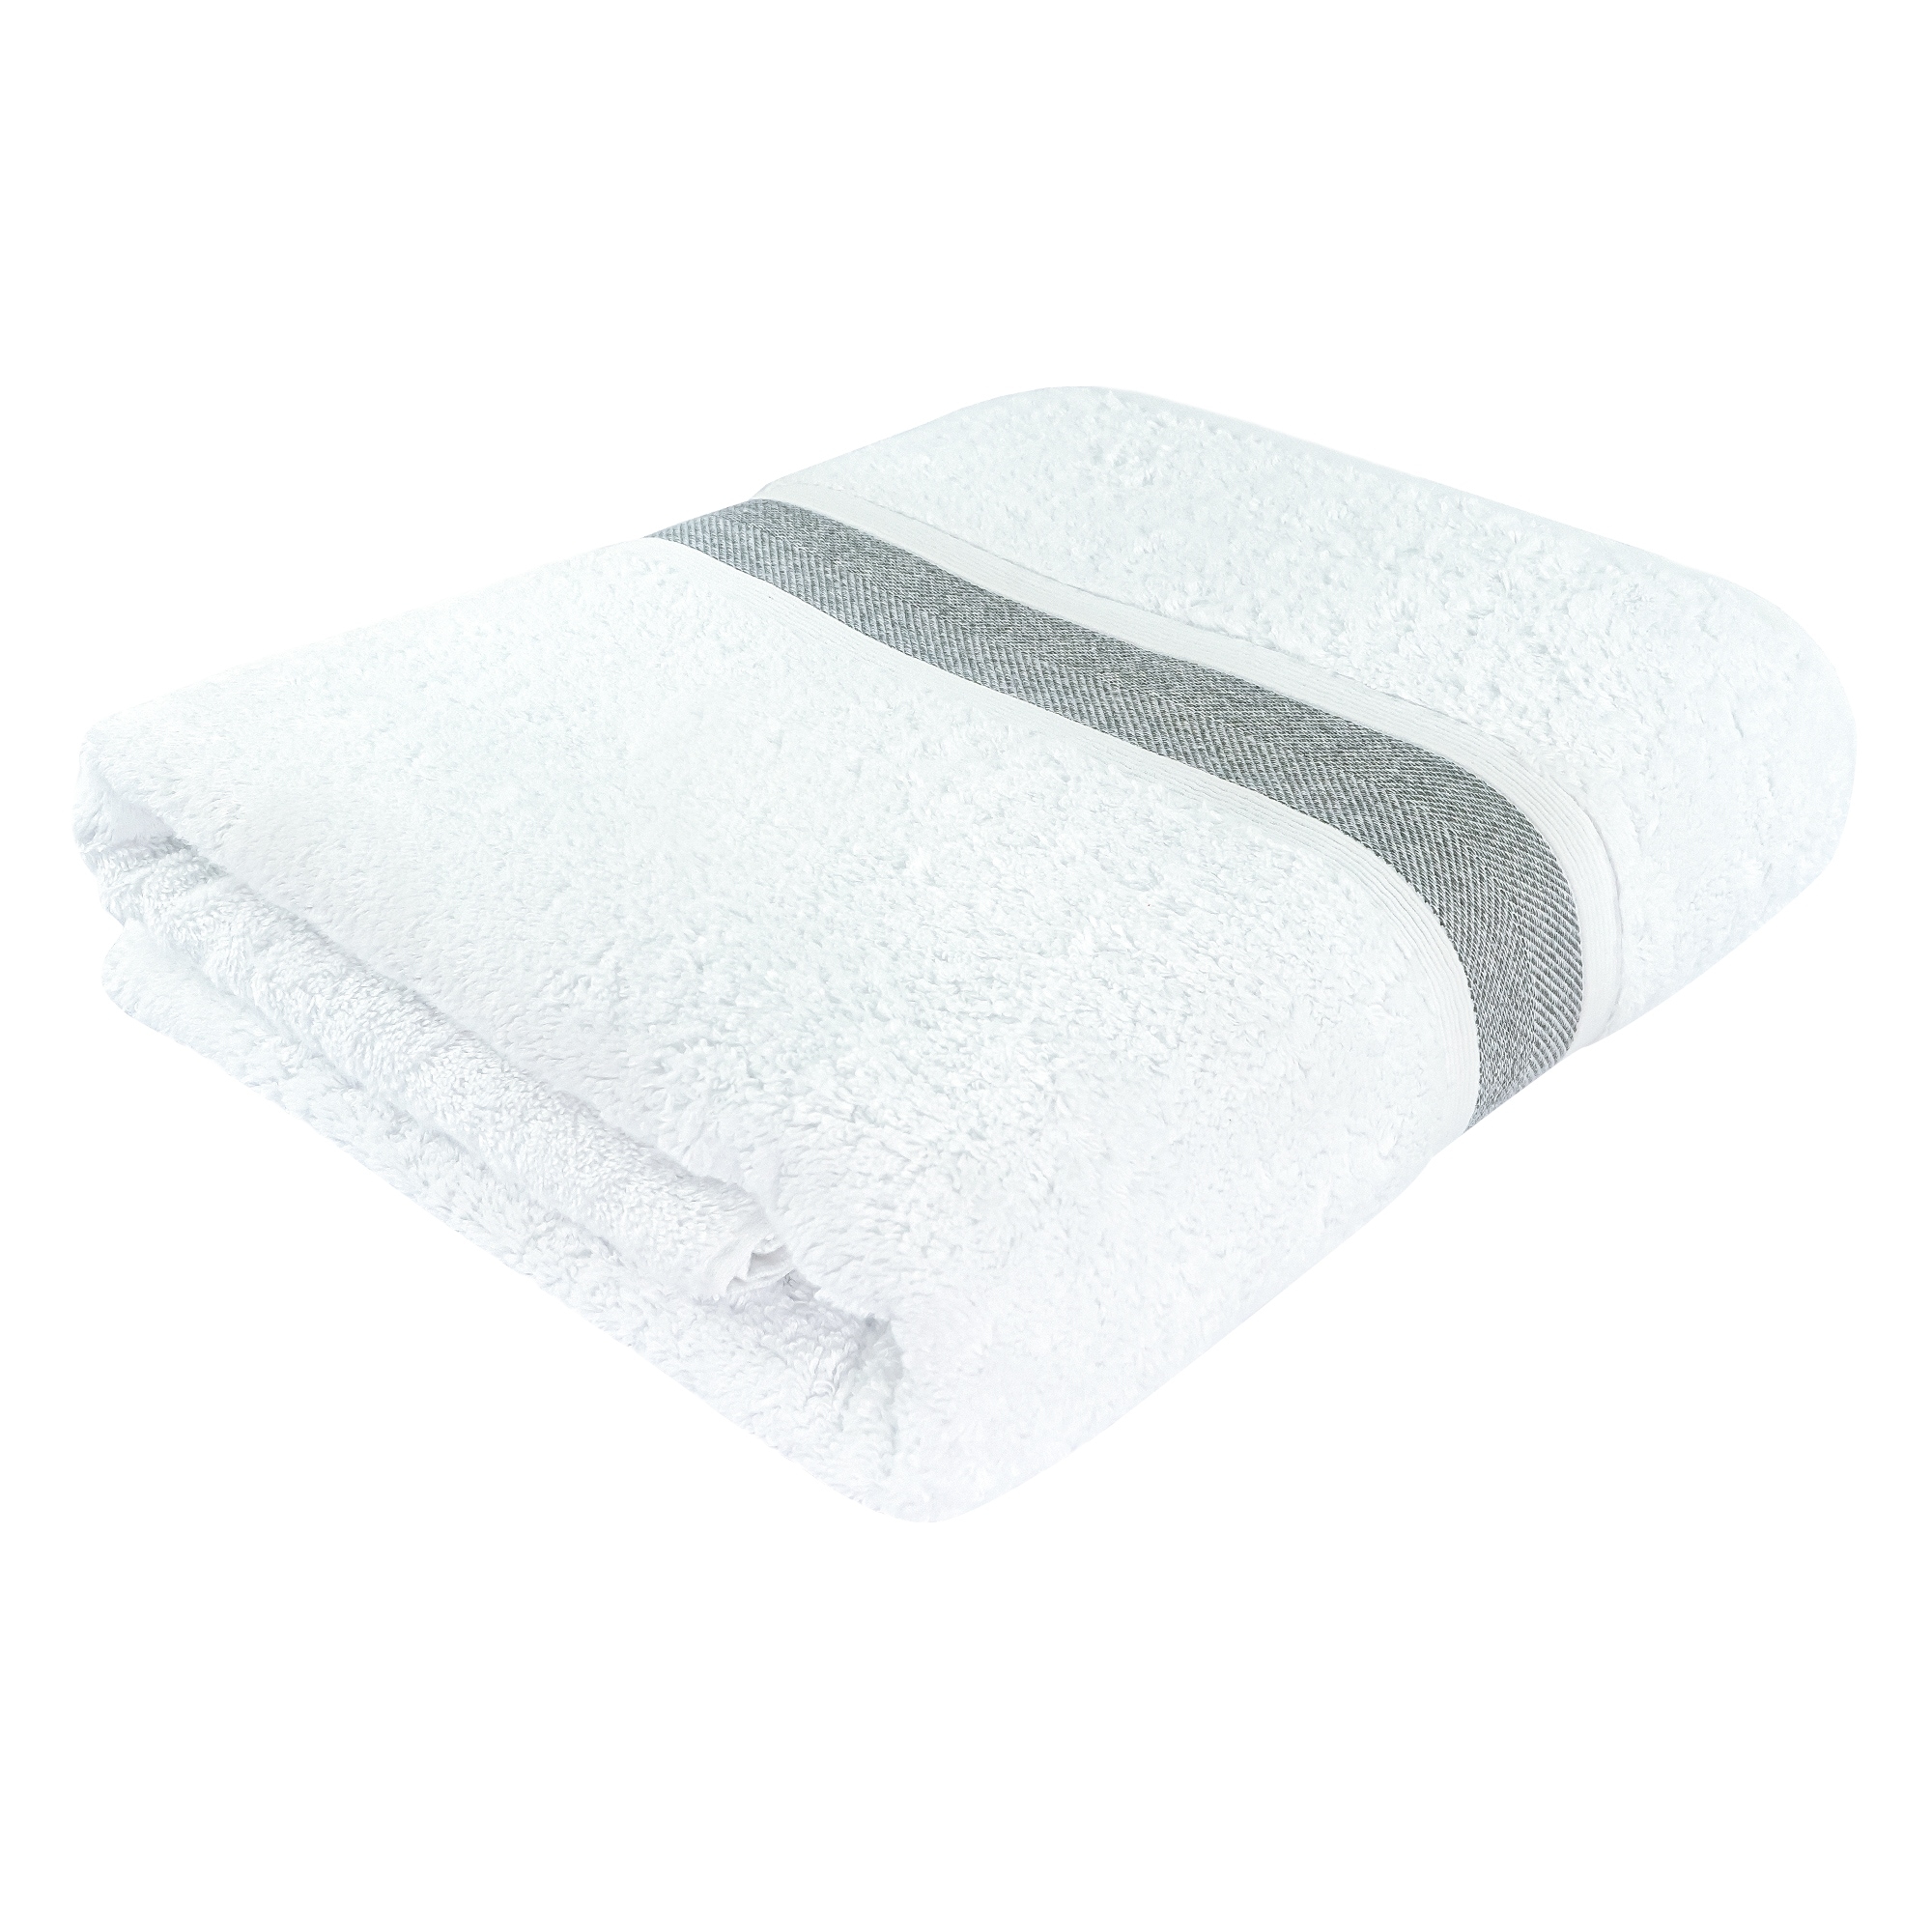 https://ak1.ostkcdn.com/images/products/is/images/direct/69a02c469b826c05ceadd19dfdc51e03cb98a927/Large-Bath-Towel---Ultra-Absorbent-Natural-Cotton-Bath-Sheet-Towel-for-Bathroom---35-x-67-Inches-Thick-Luxury-Bath-Towel.jpg